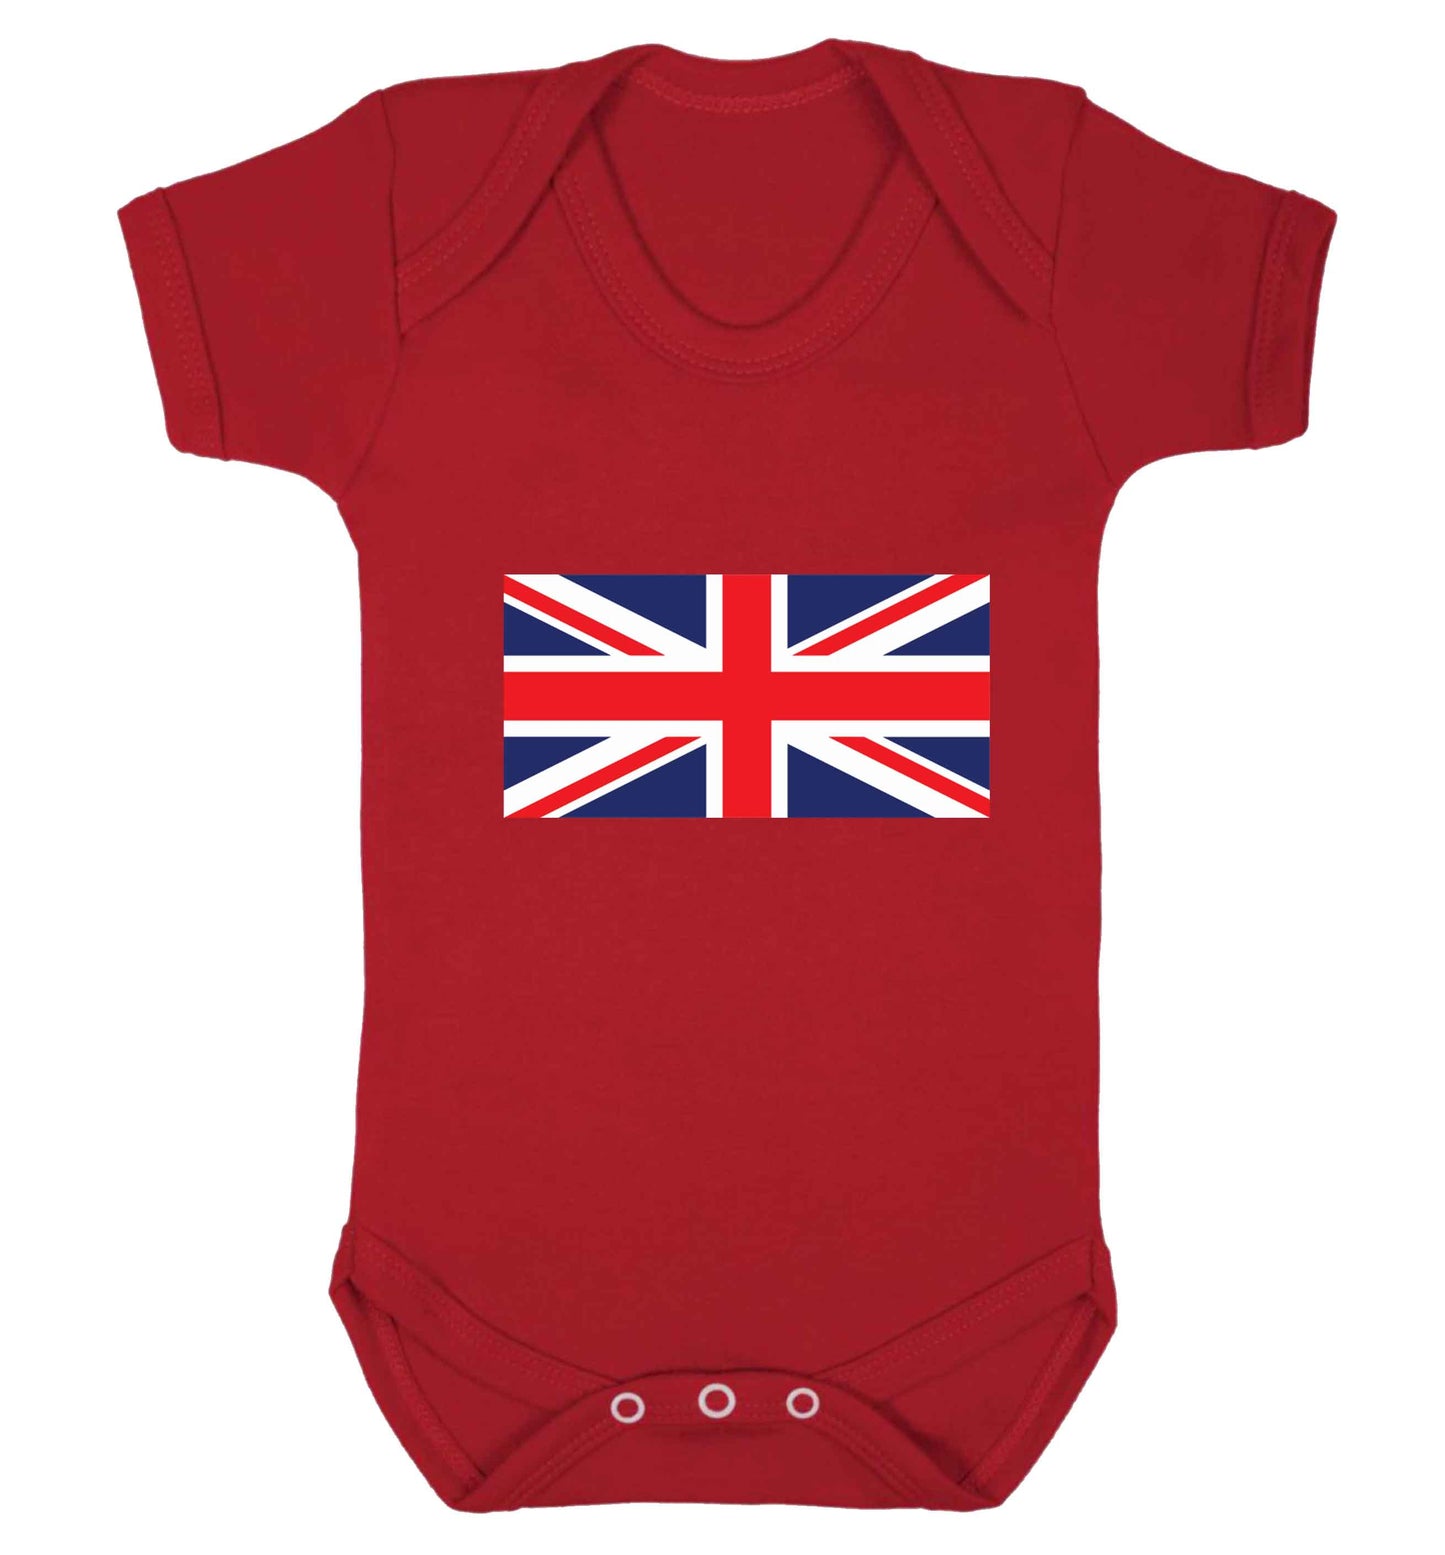 Union Jack baby vest red 18-24 months